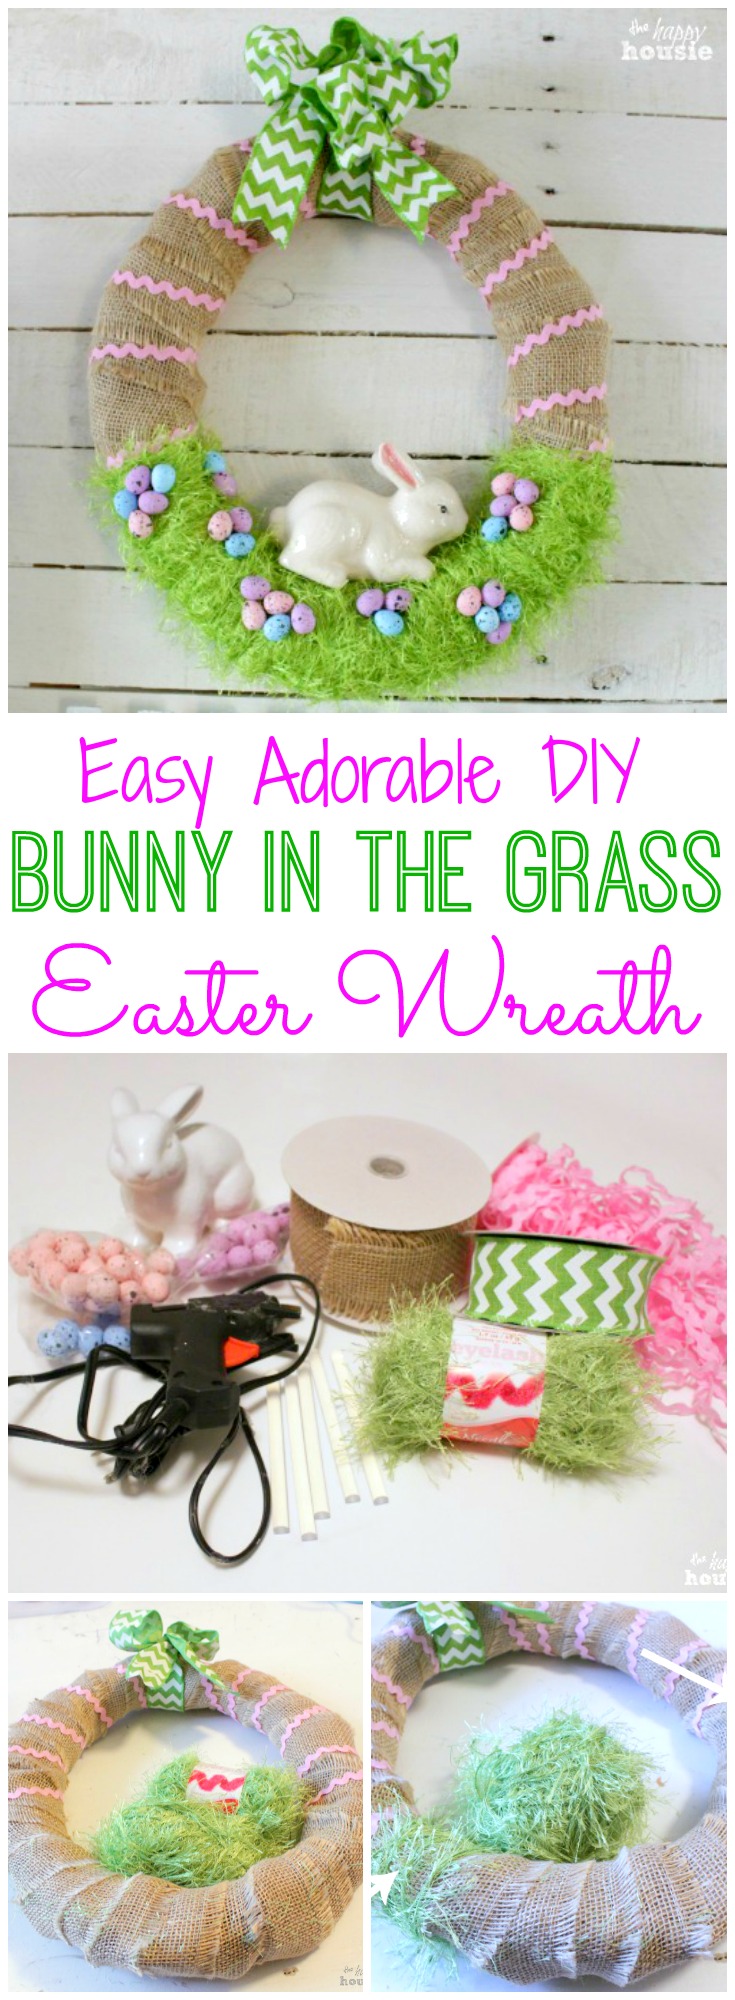 How to make an easy adorable DIY Bunny in the grass Easter Wreath or Spring Wreath at thehappyhousie.com